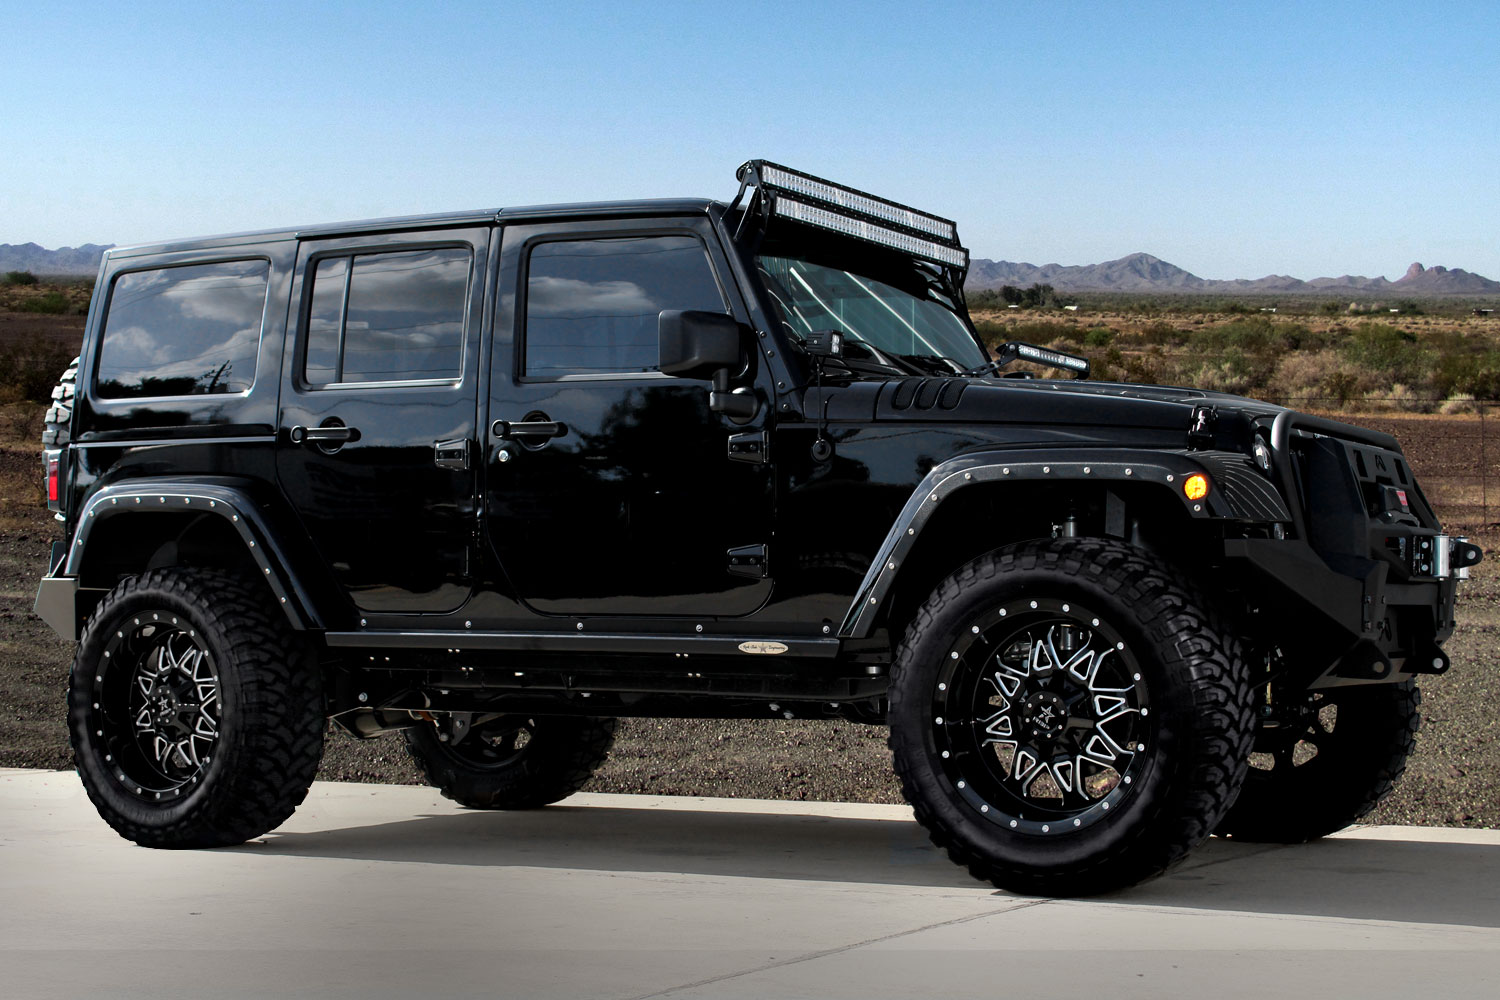 An image of a Black Jeep Wrangler on RBP Repulsor M/T tires